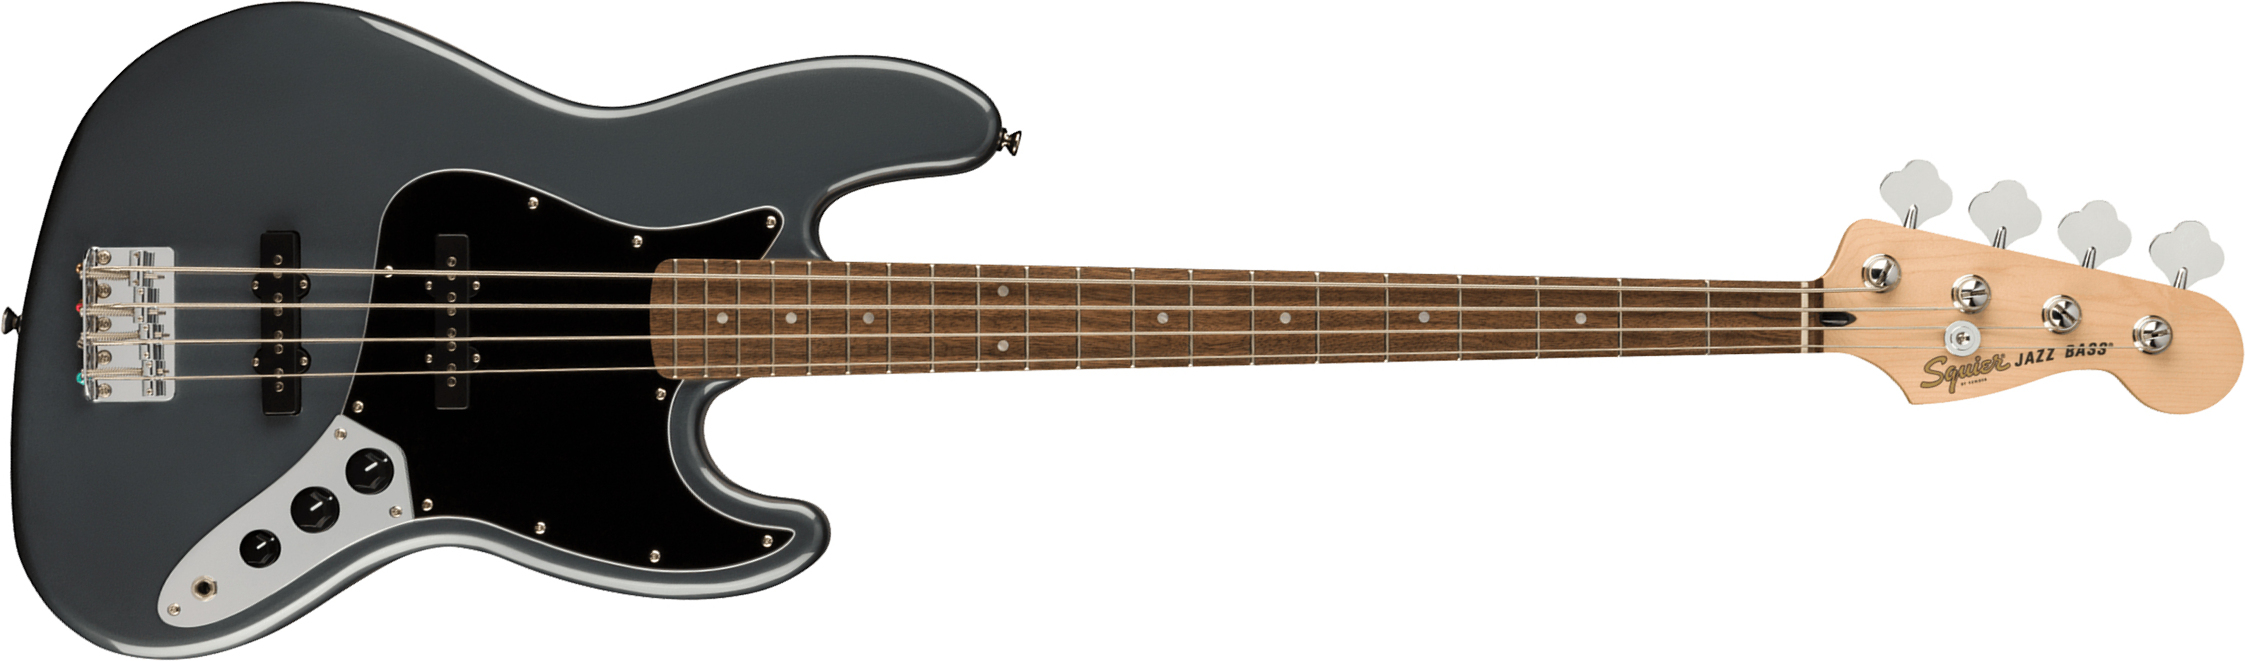 Squier Jazz Bass Affinity 2021 Lau - Charcoal Frost Metallic - Solidbody E-bass - Main picture